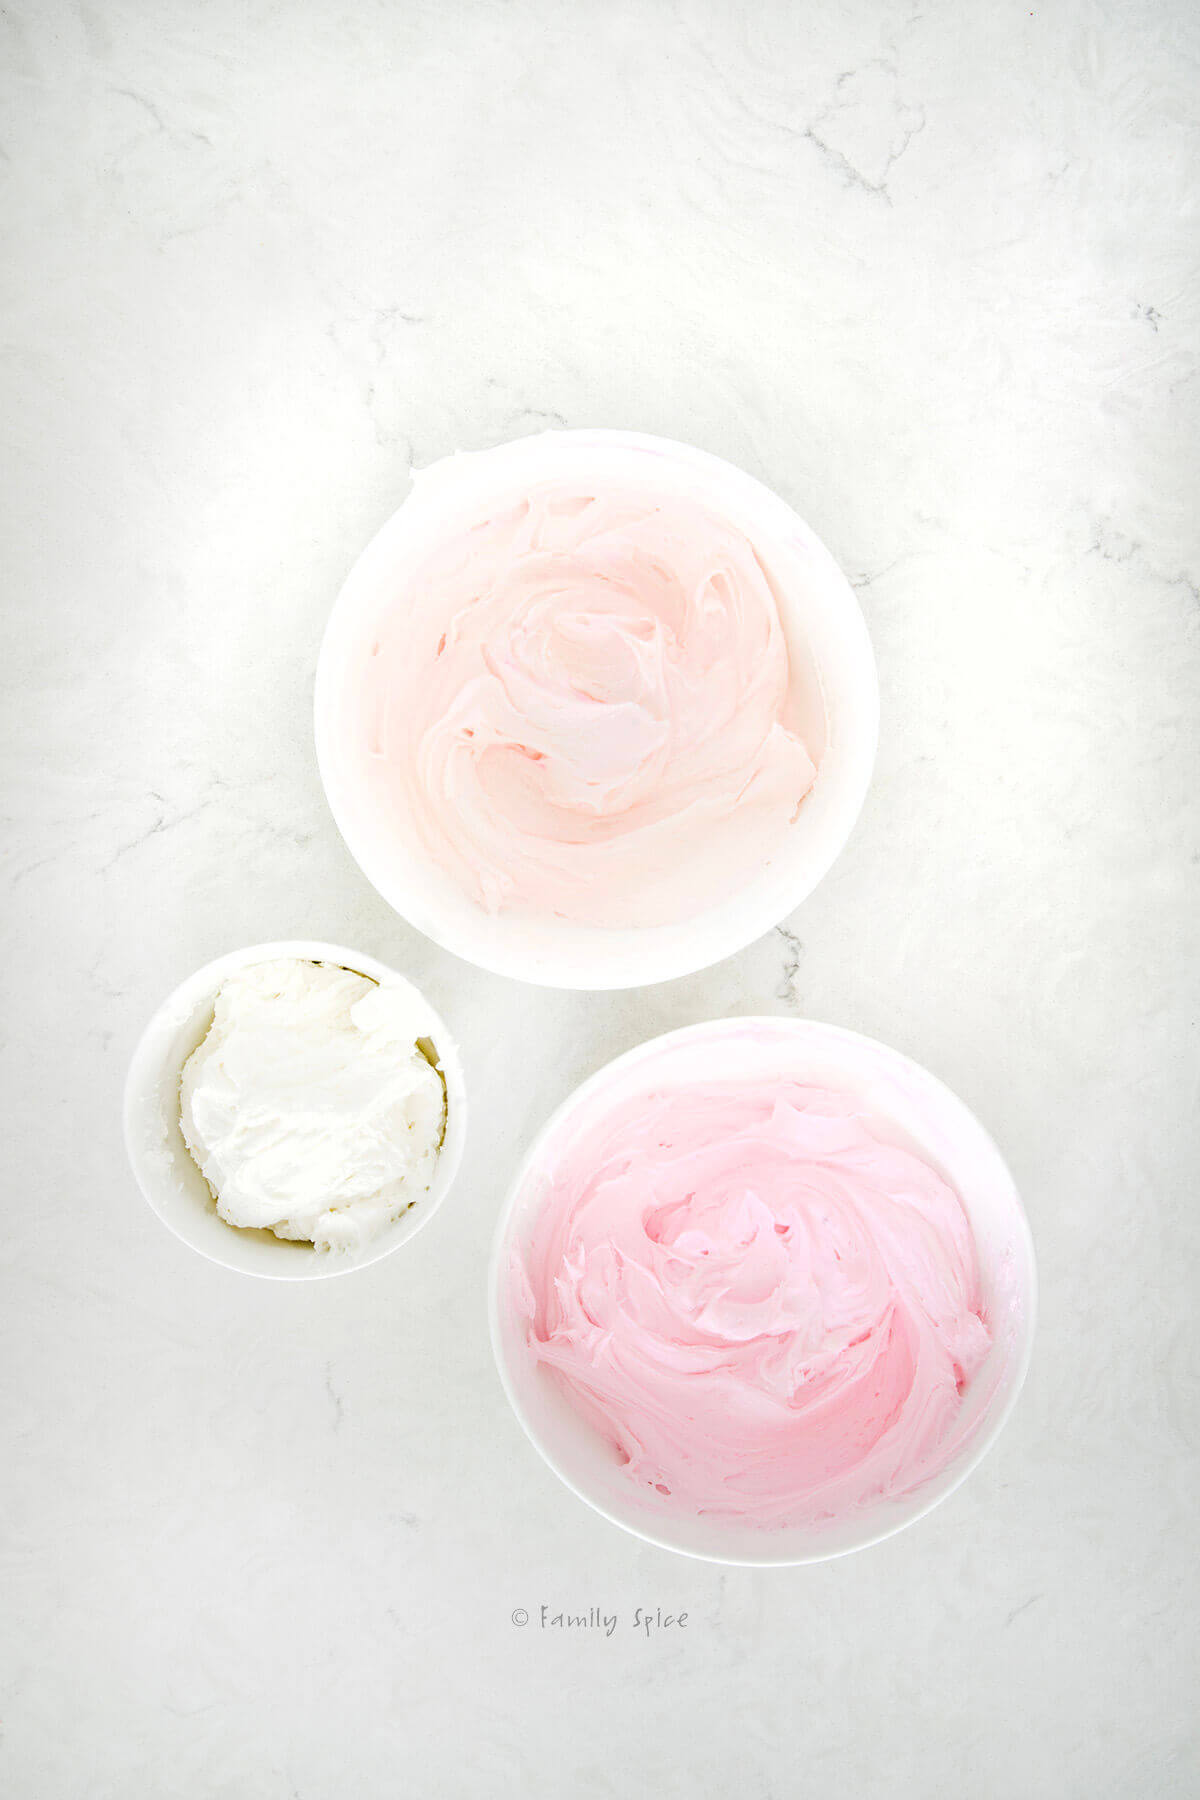 A large bowl of dark pink frosting, a bowl of light pink frosting and a smaller bowl of white frosting